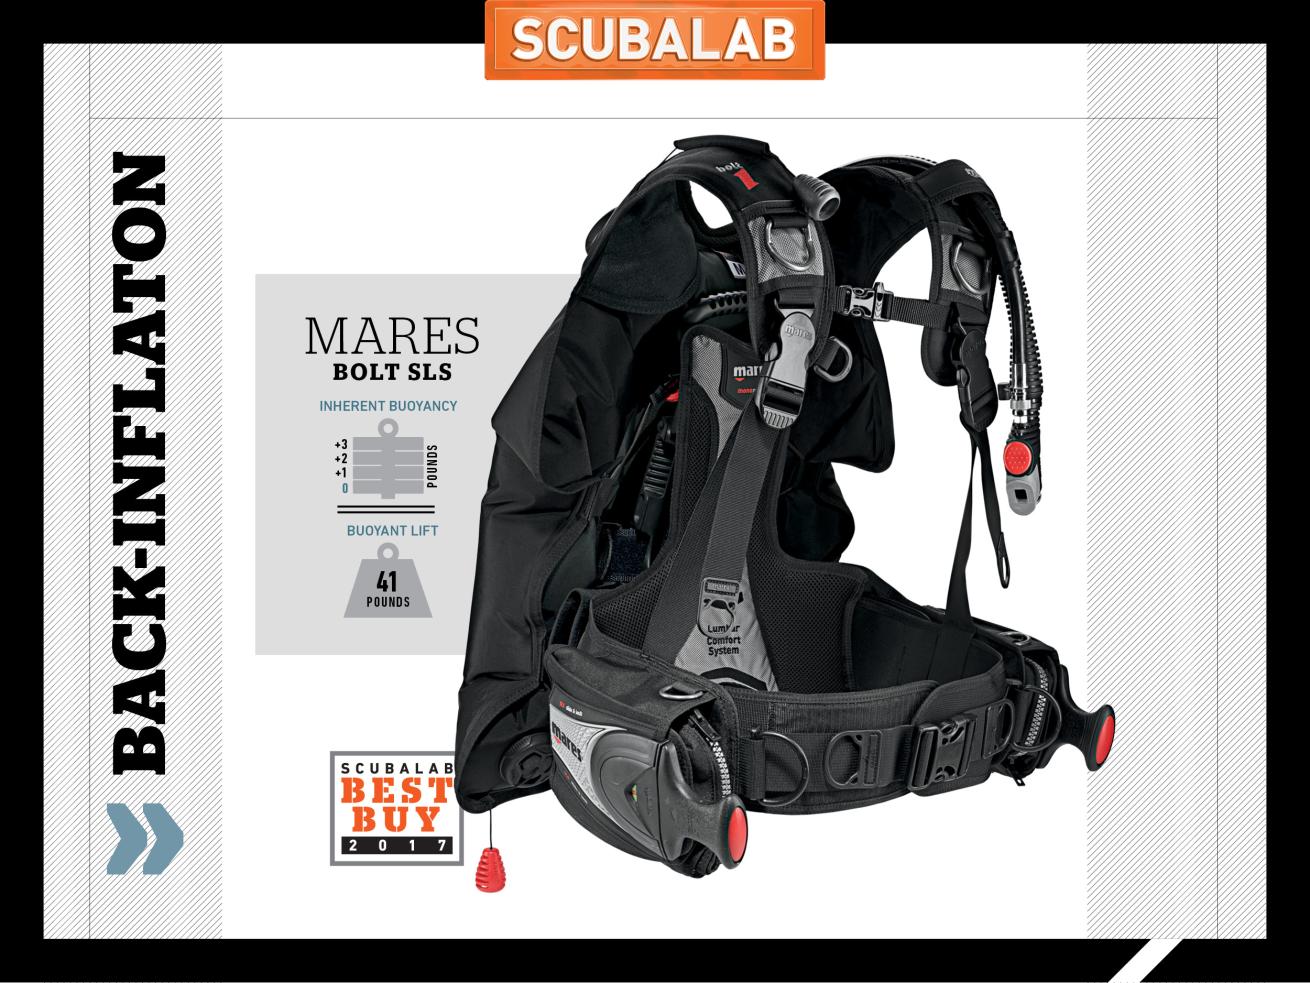 Mares Bolt SLS back-inflate BC ScubaLab gear review.